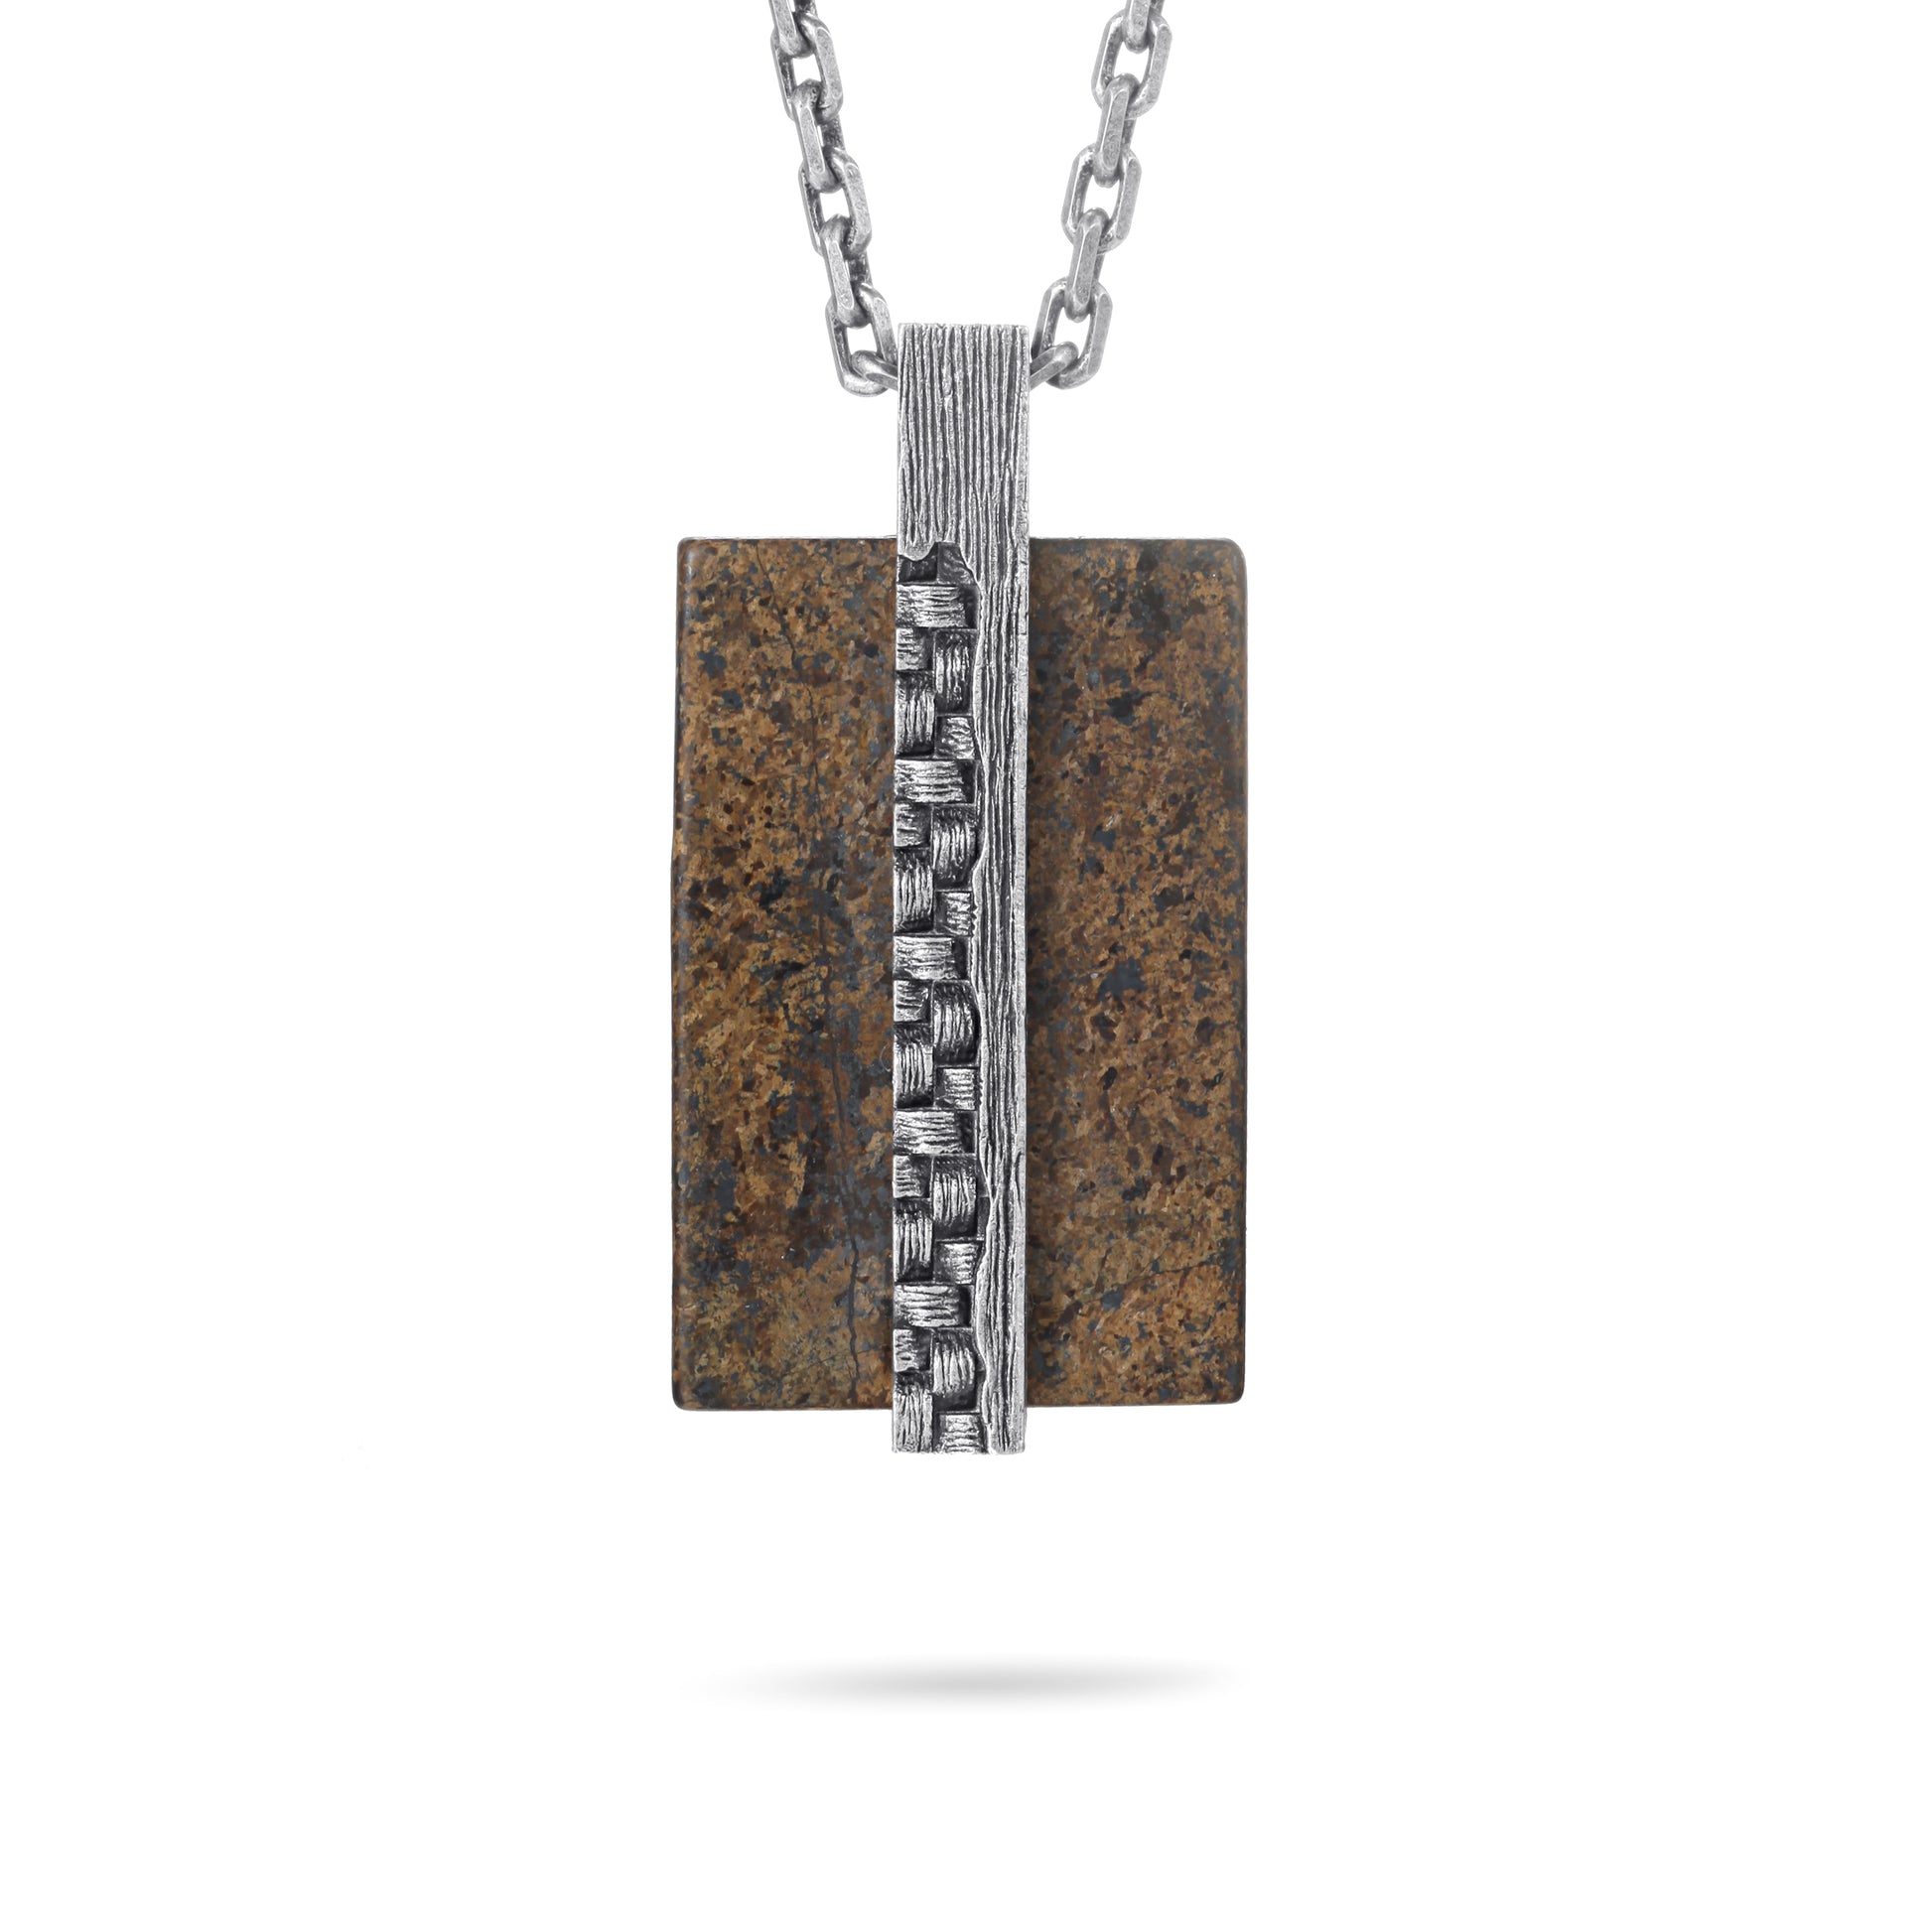 Men's Tag Necklace with Woven Element - KINGKA Jewelry